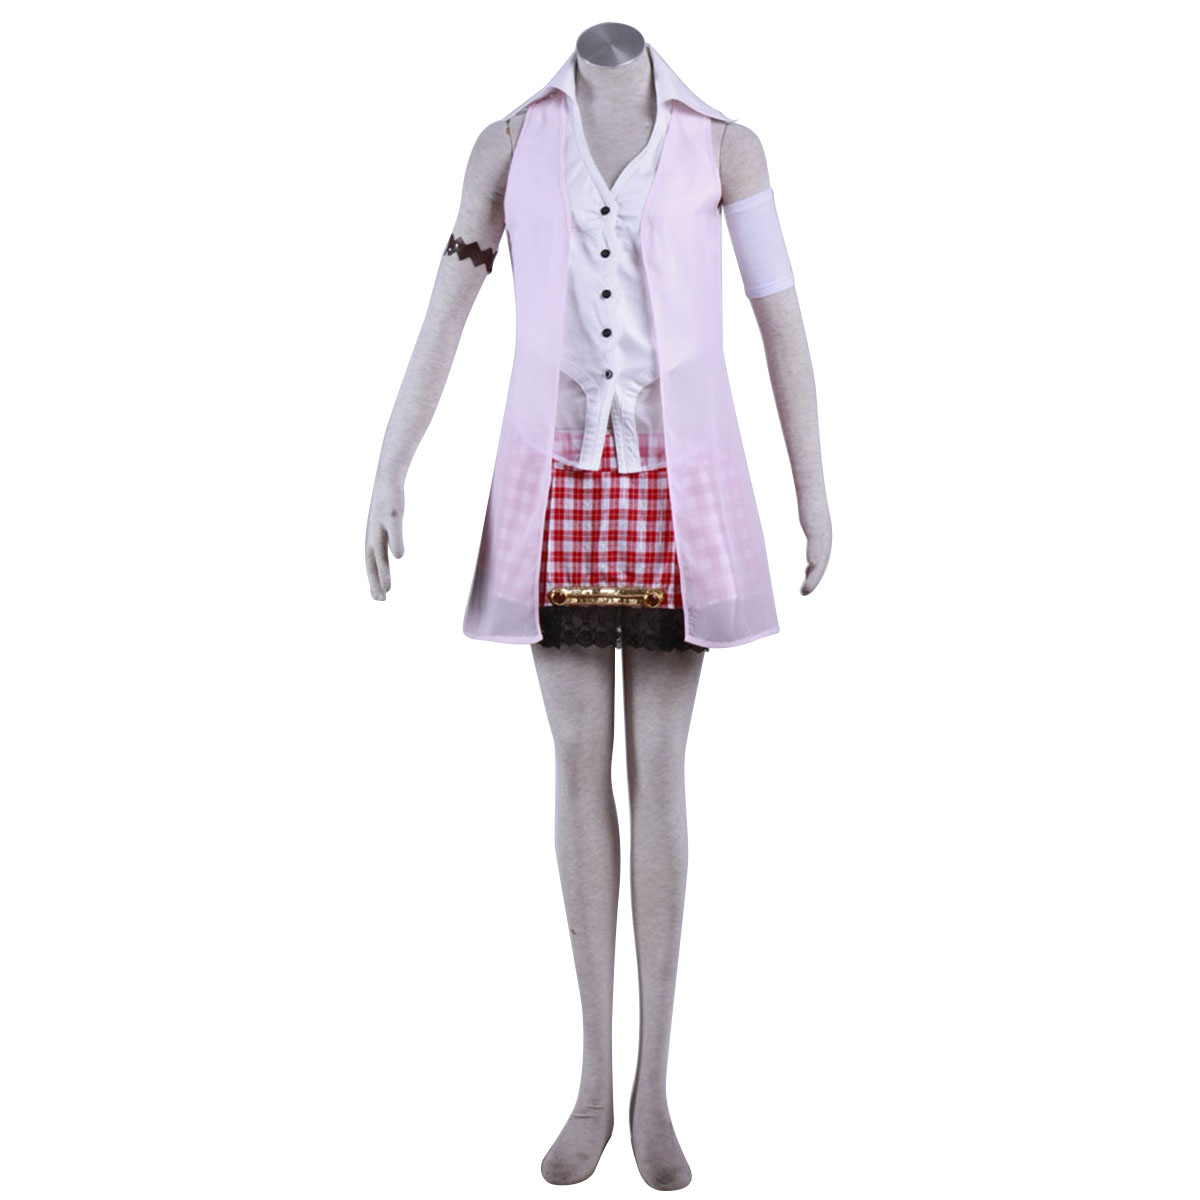 Final Fantasy XIII Serah Farron 1 Anime Cosplay Costumes Outfit